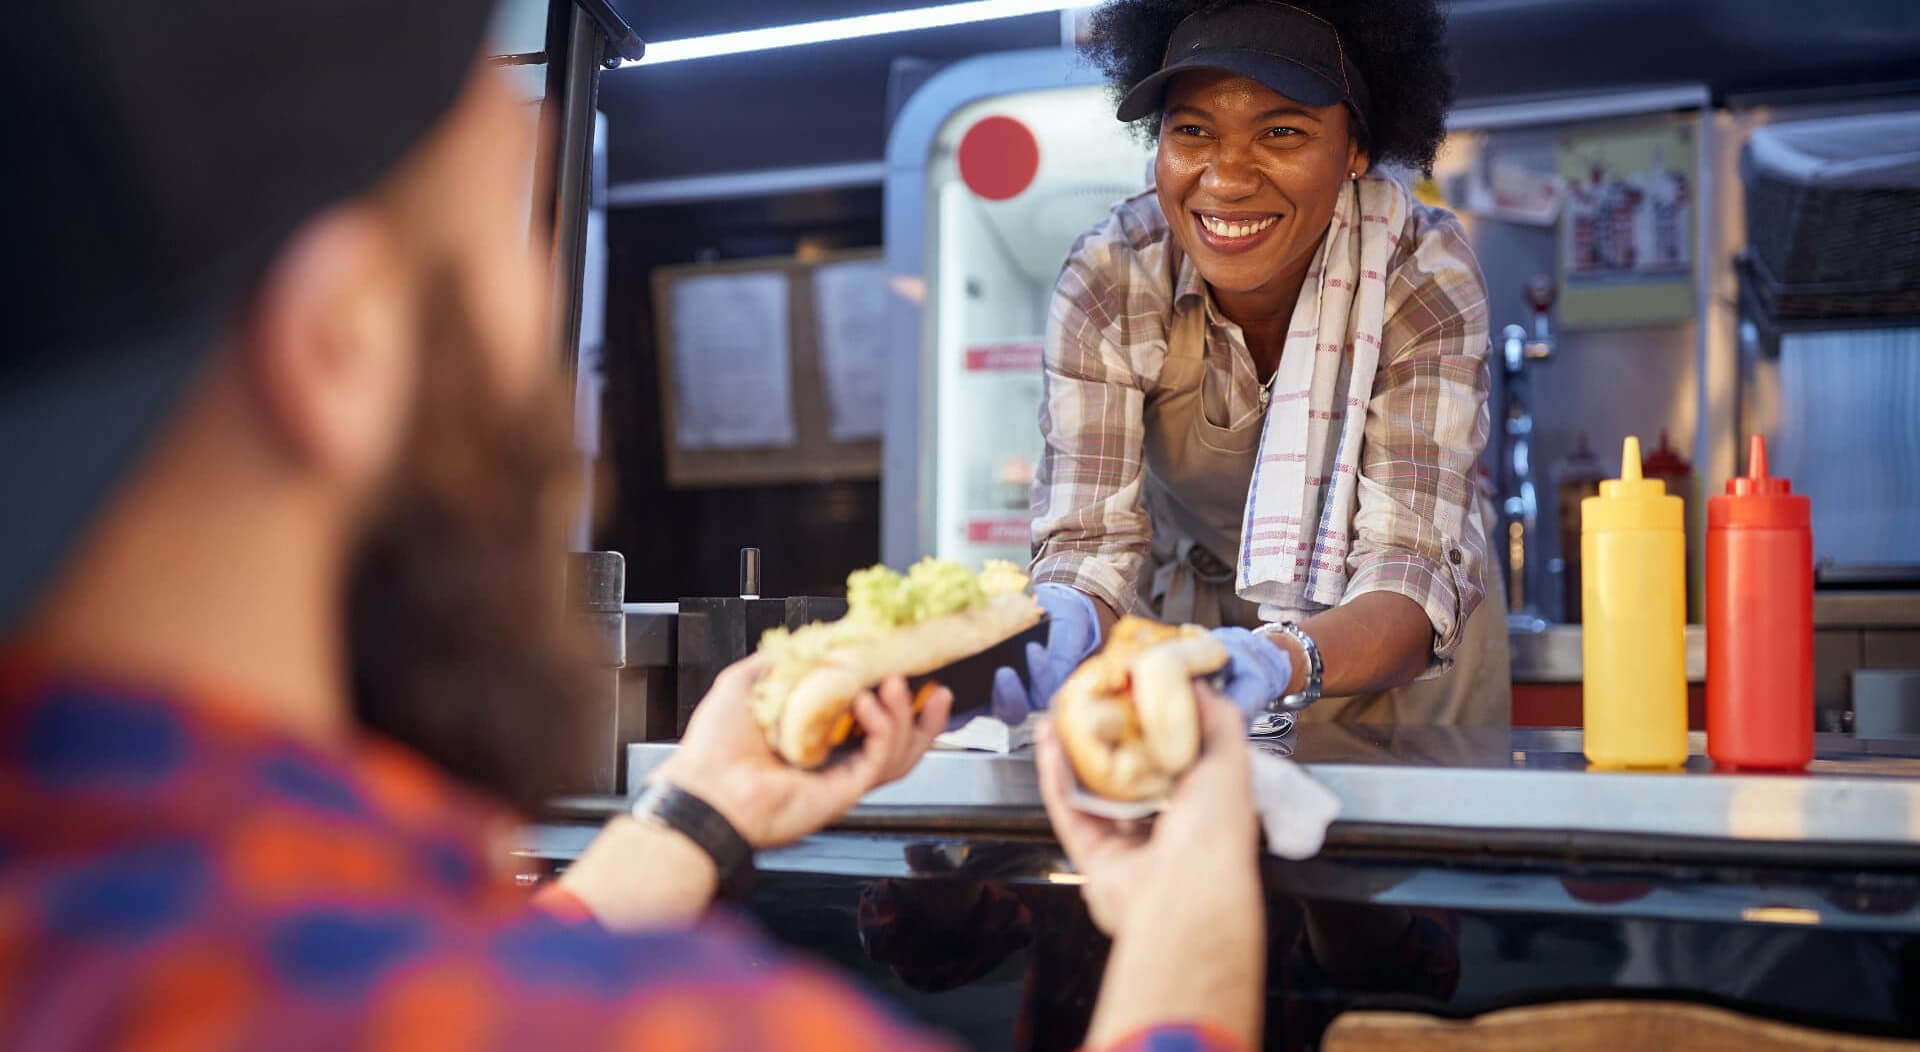 food truck employee giving two sandwiches to a male customer